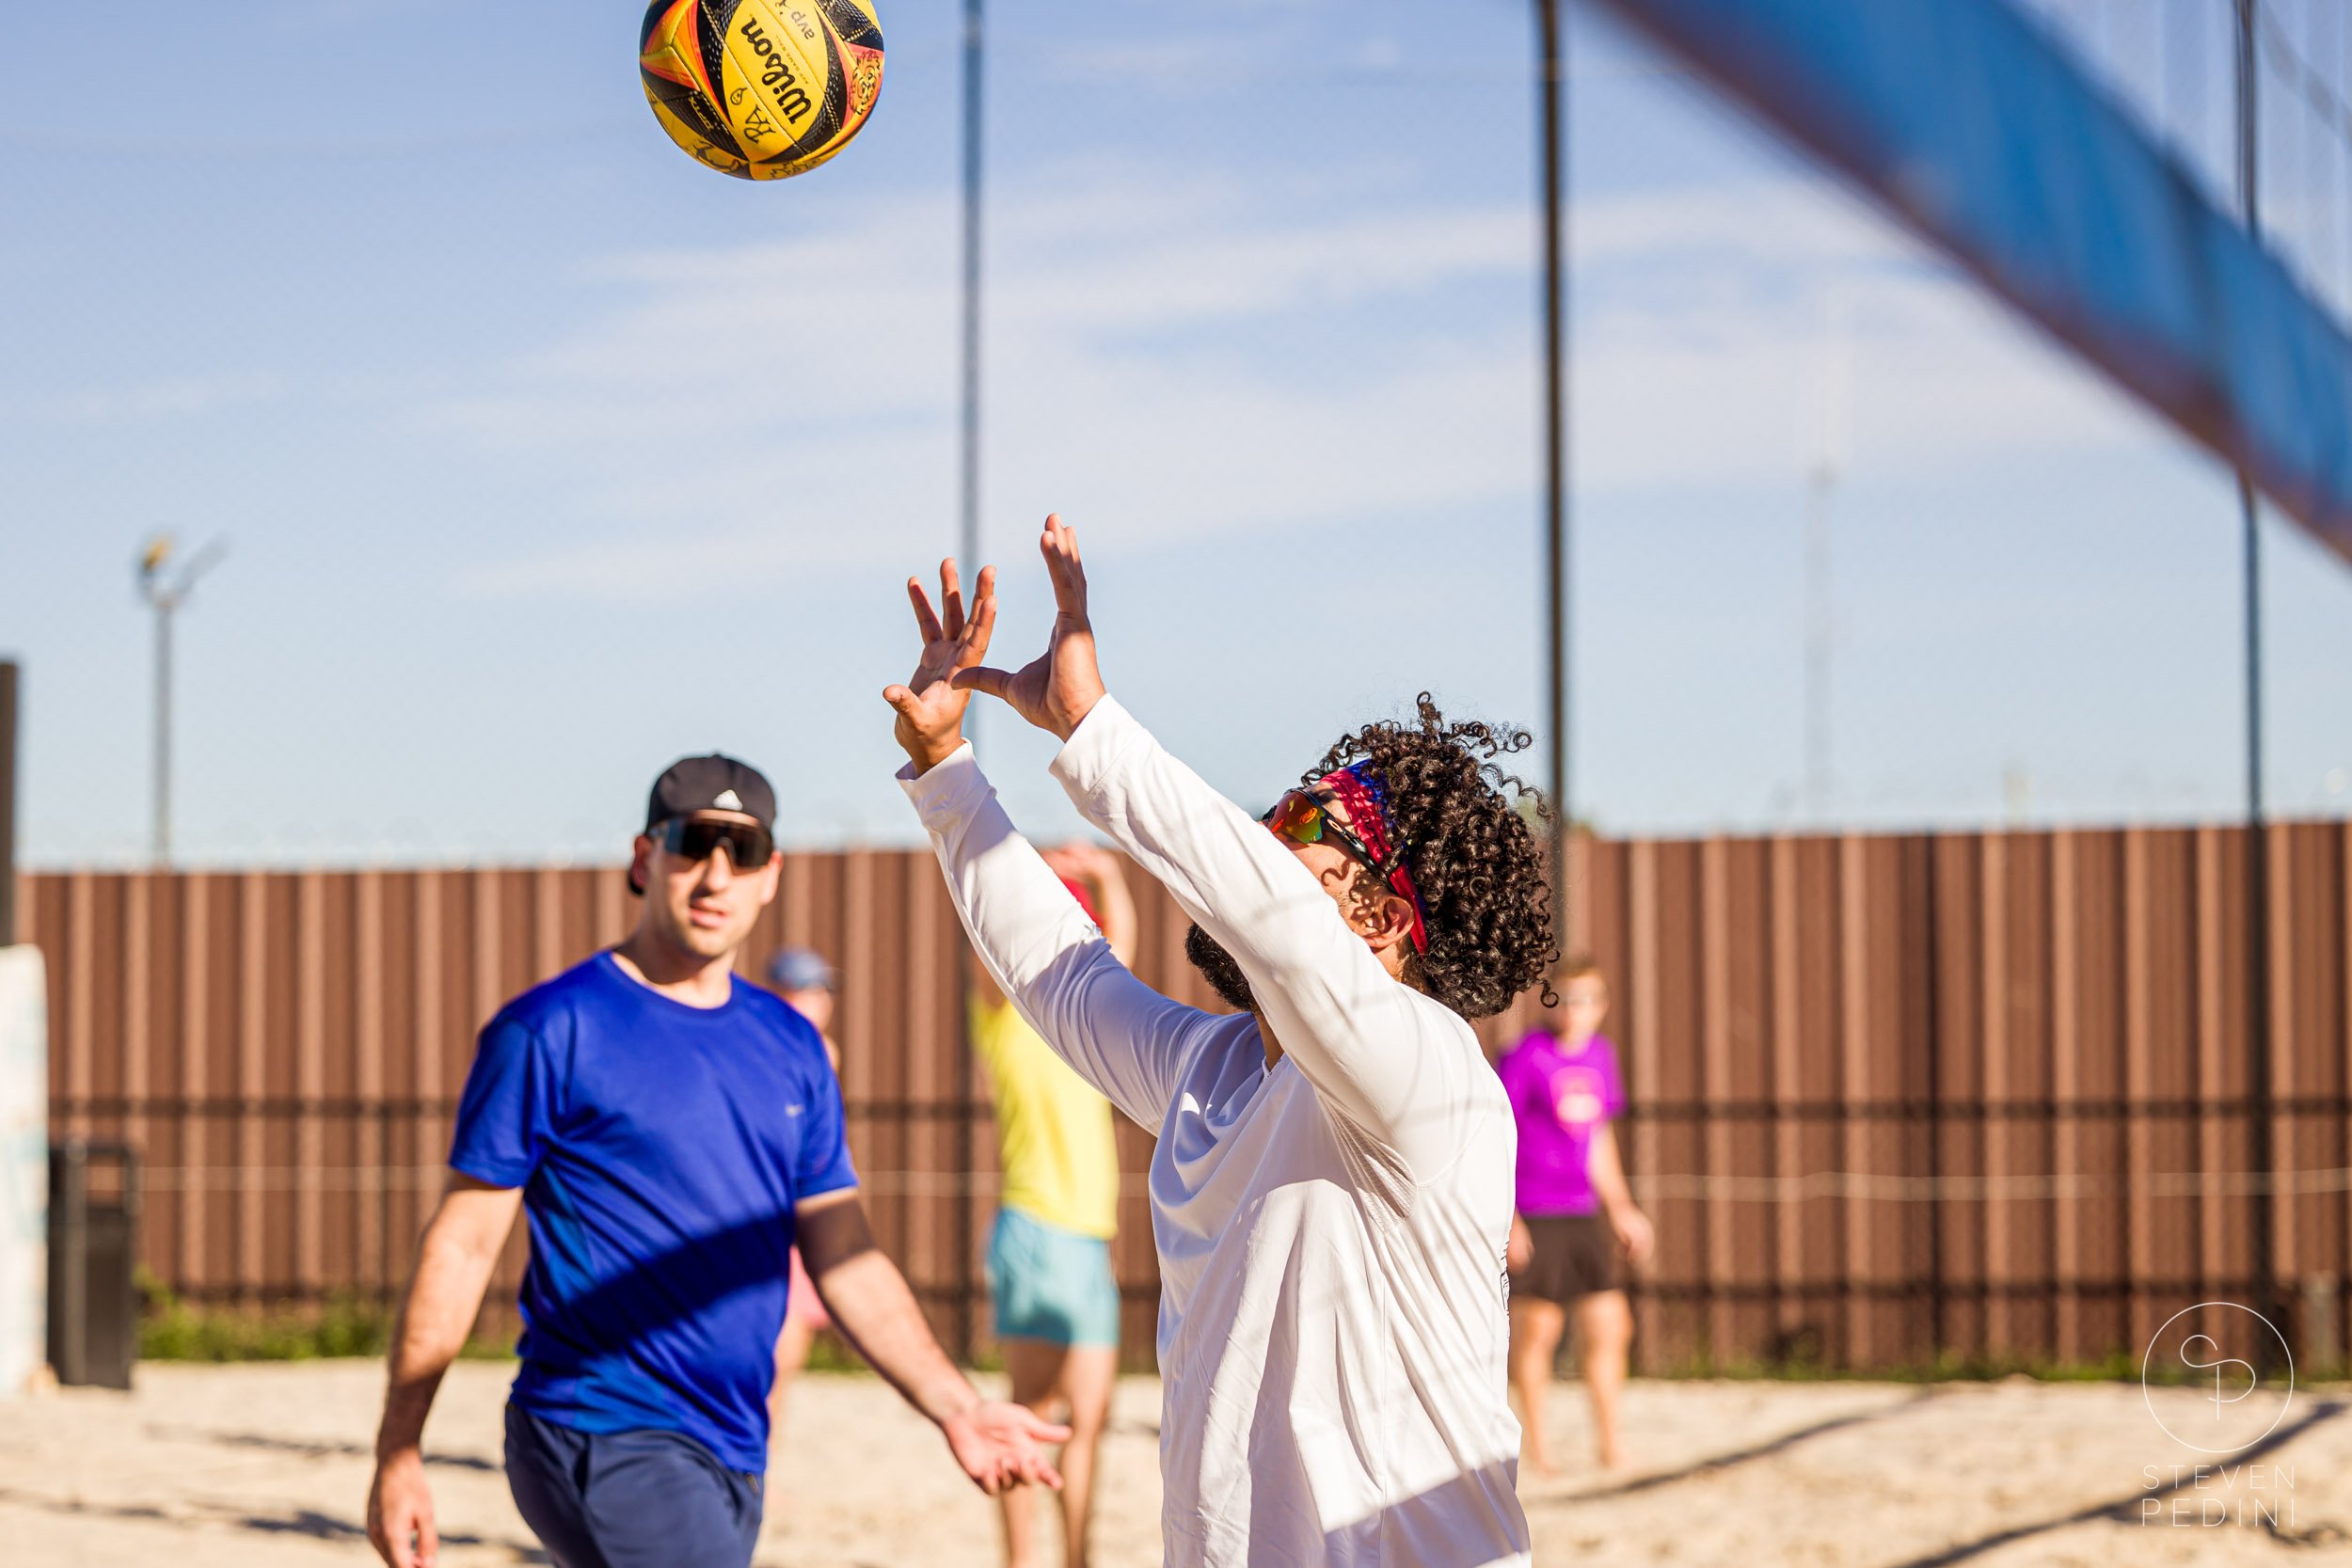 Steven Pedini Photography - Bumpy Pickle - Sand Volleyball - Houston TX - World Cup of Volleyball - 00016.jpg